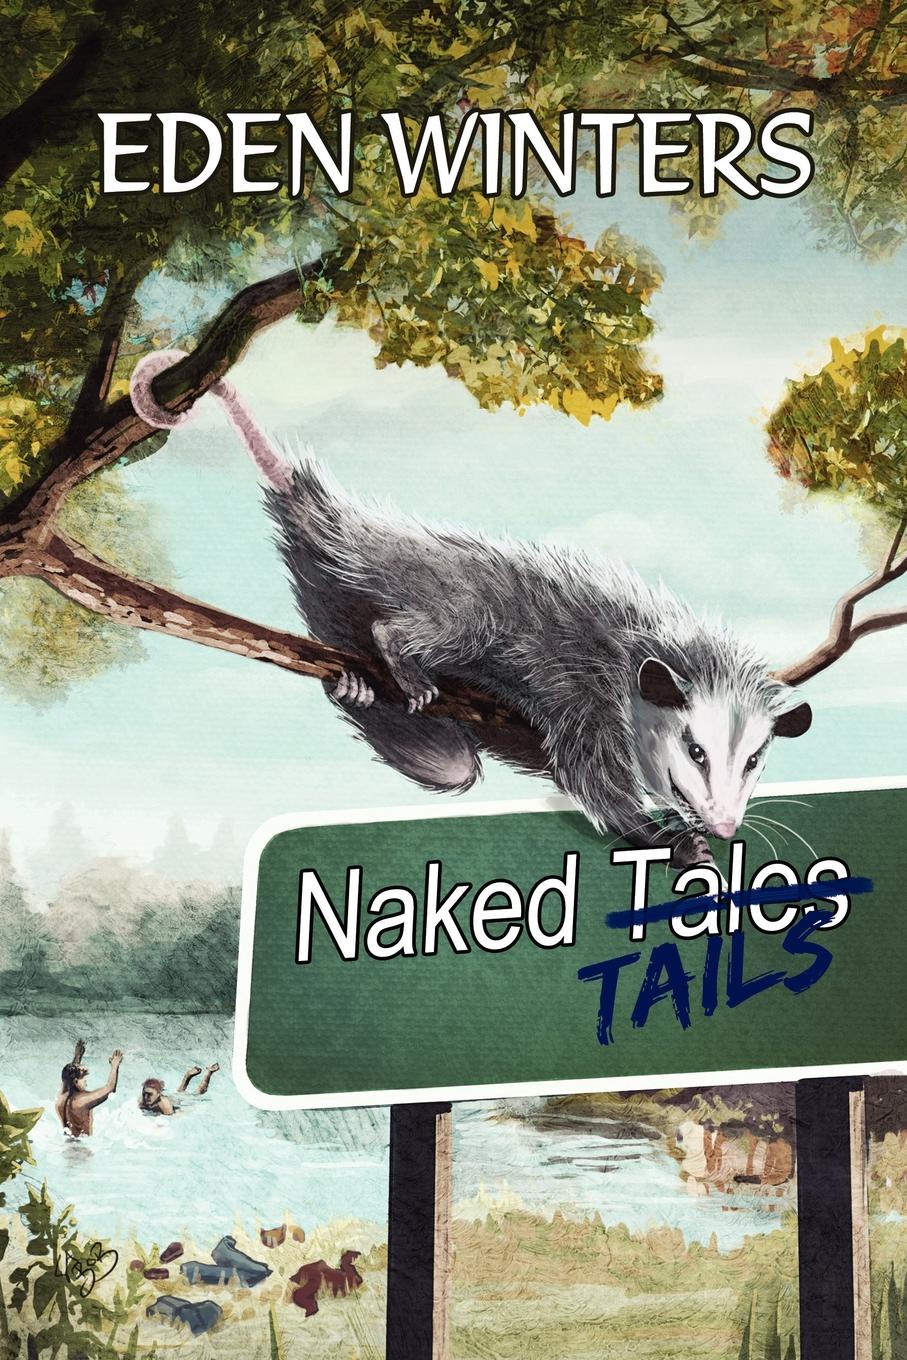 Eden Winters Naked Tails